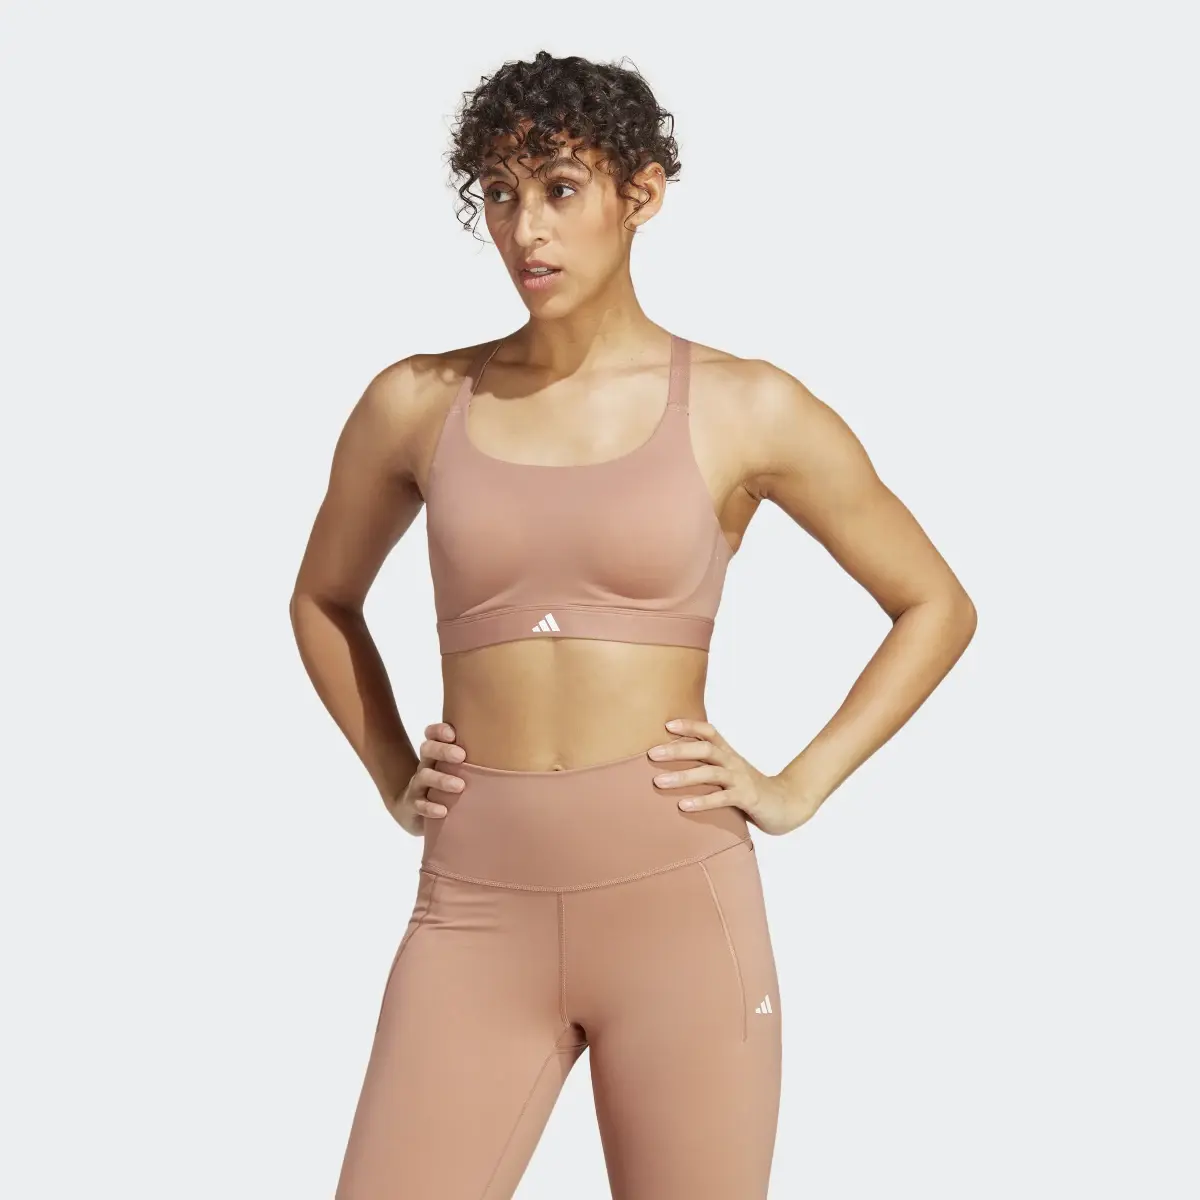 Adidas TLRD Impact Luxe Training High-Support Bra. 2